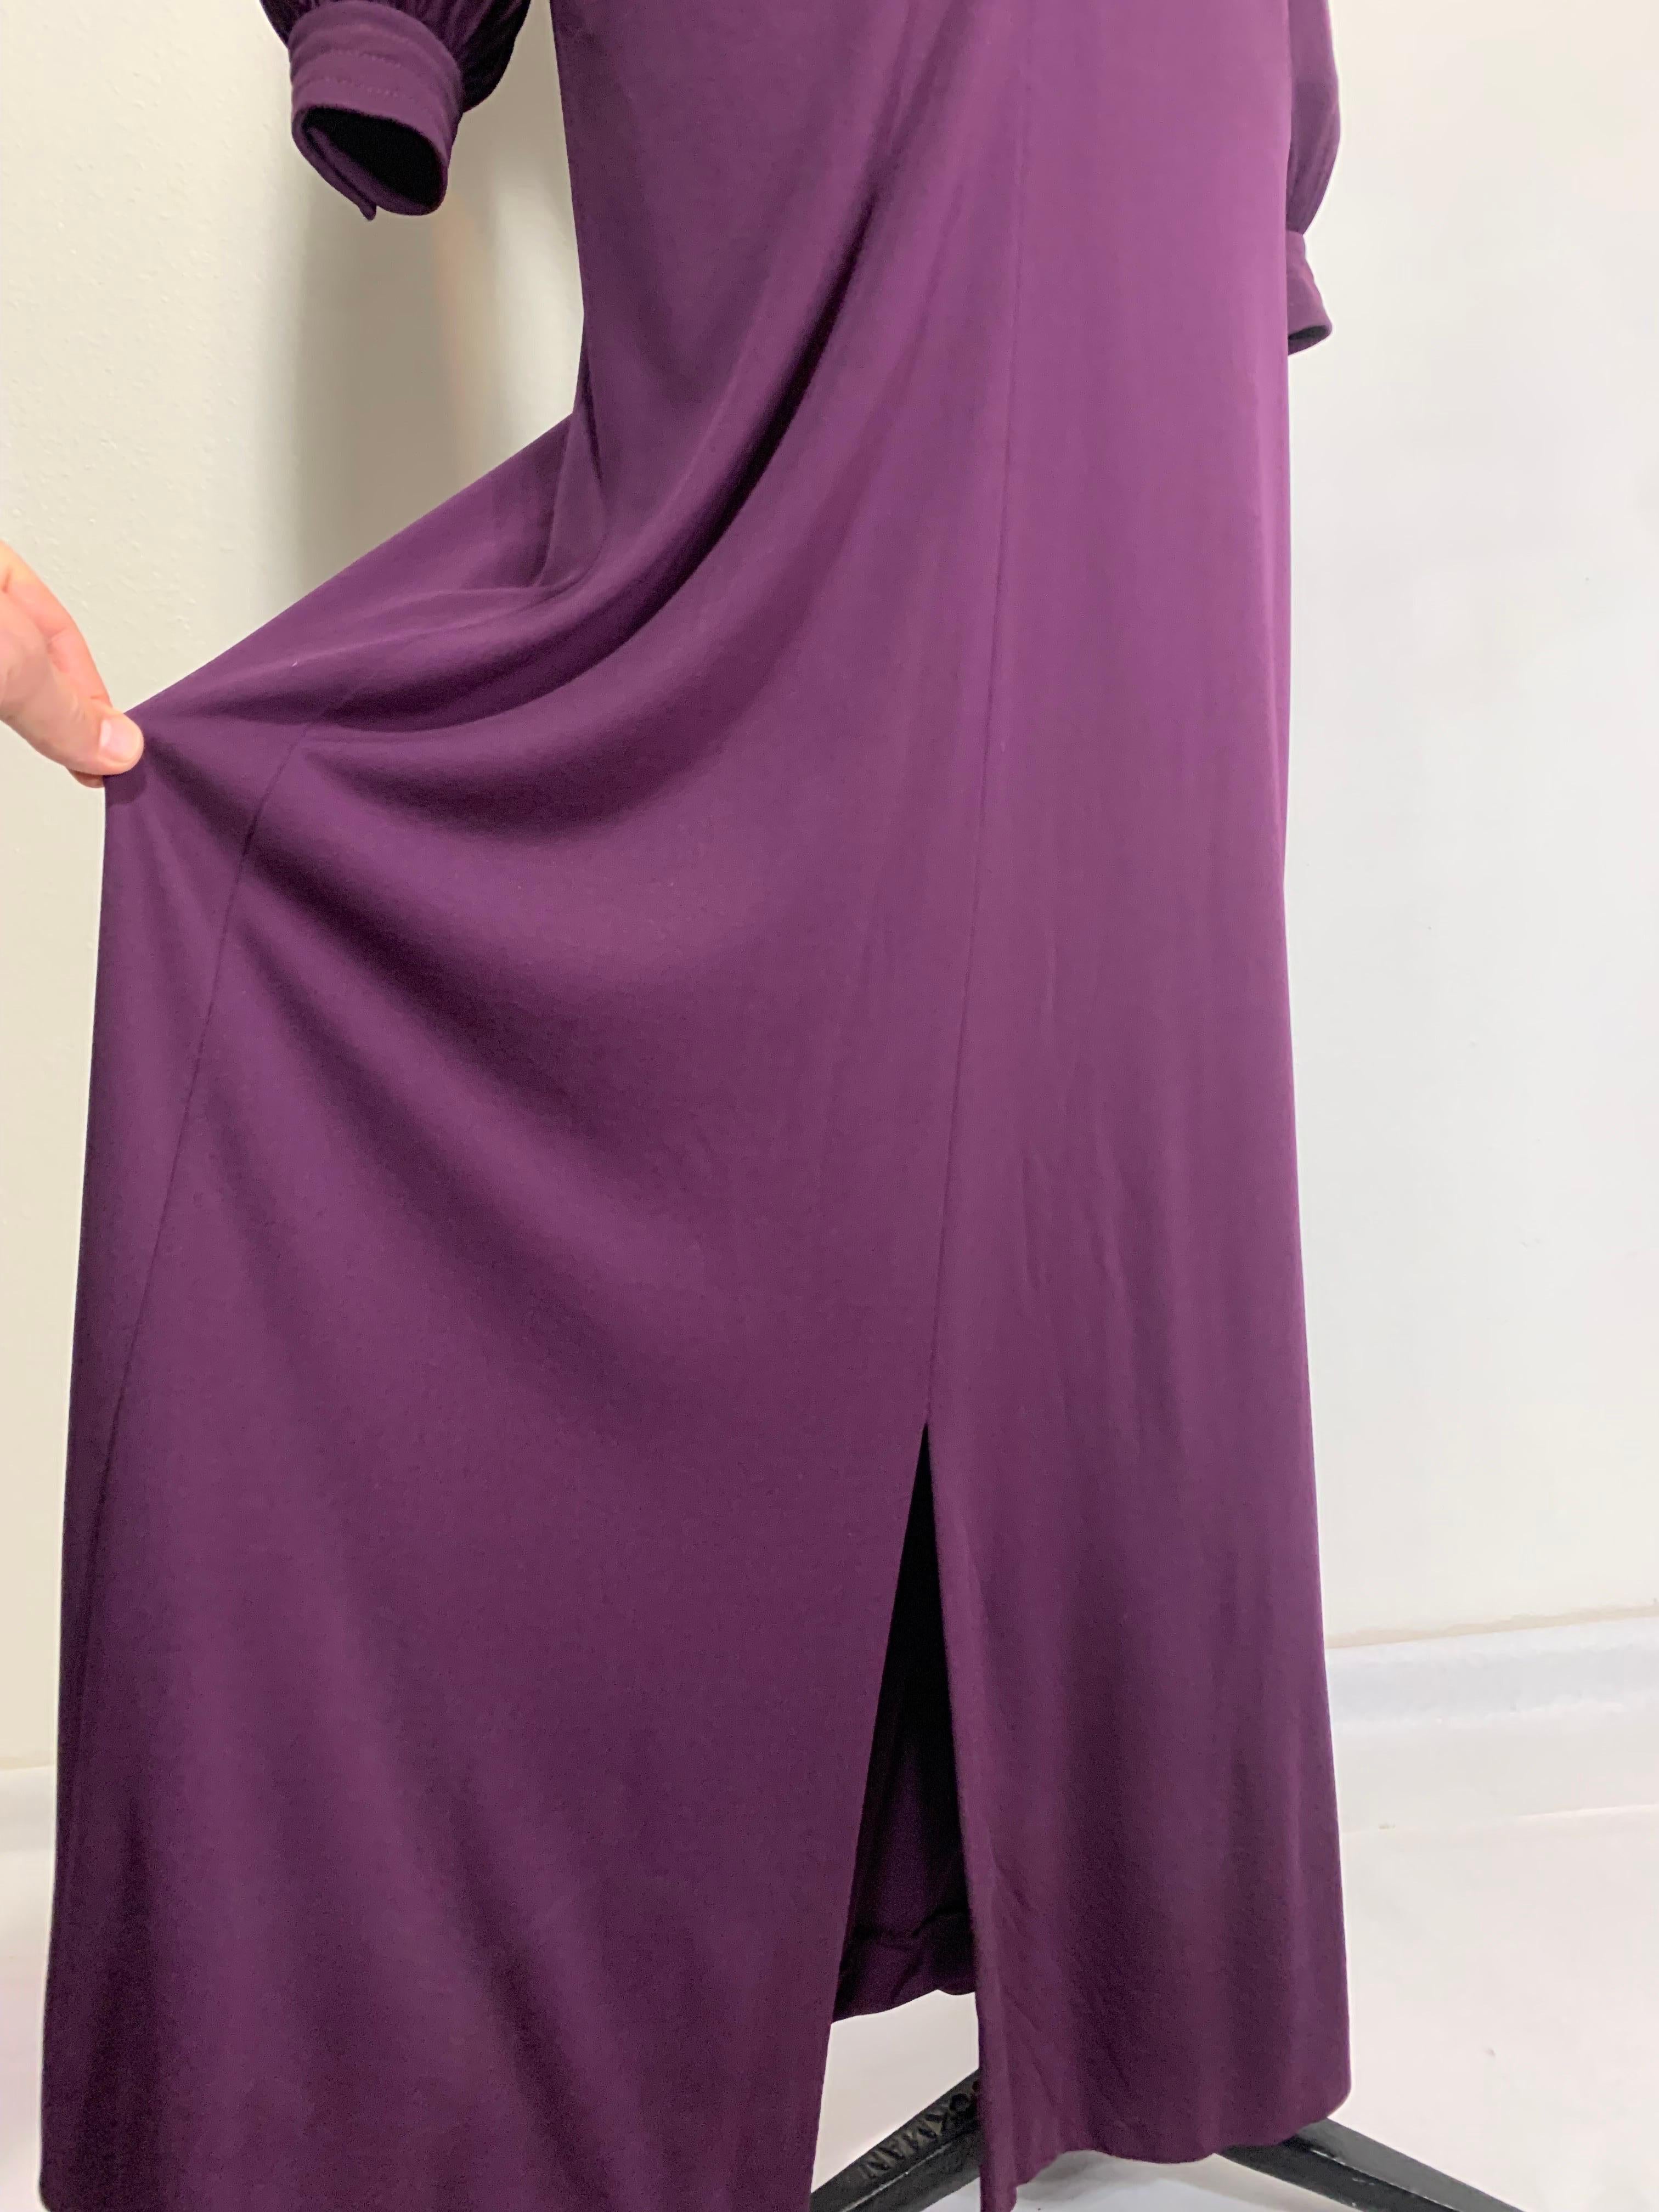 1975 James Galanos Dramatic Aubergine Jersey Maxi Gown w Fabulous Draped Hood For Sale 8